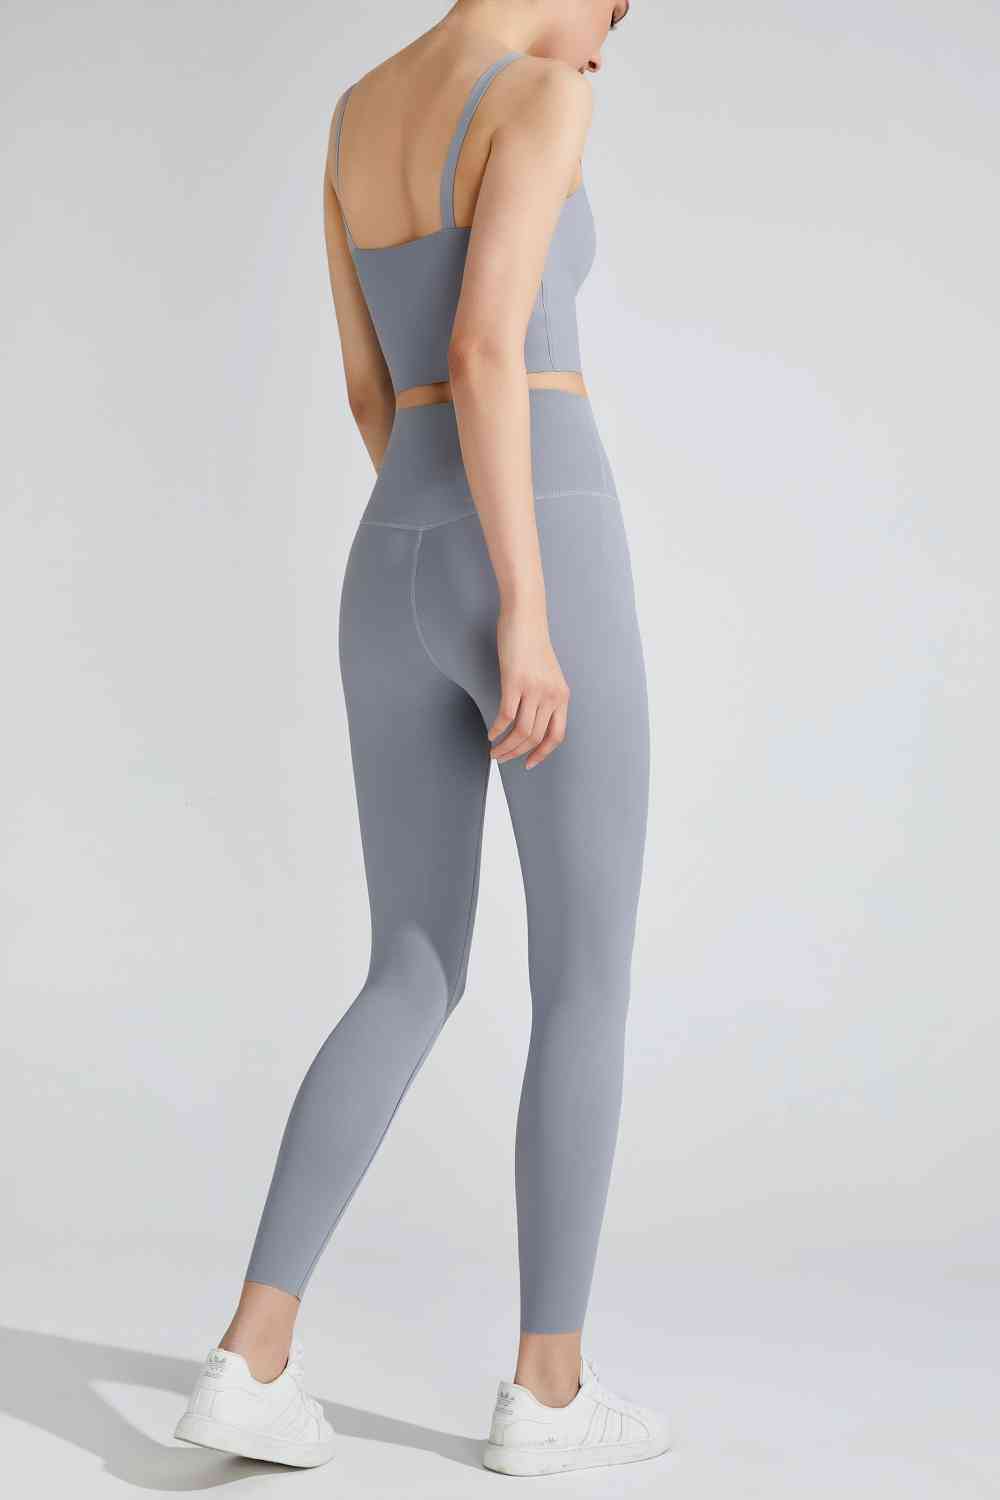 Light Gray Wide Waistband Sports Leggings Sentient Beauty Fashions Apparel & Accessories